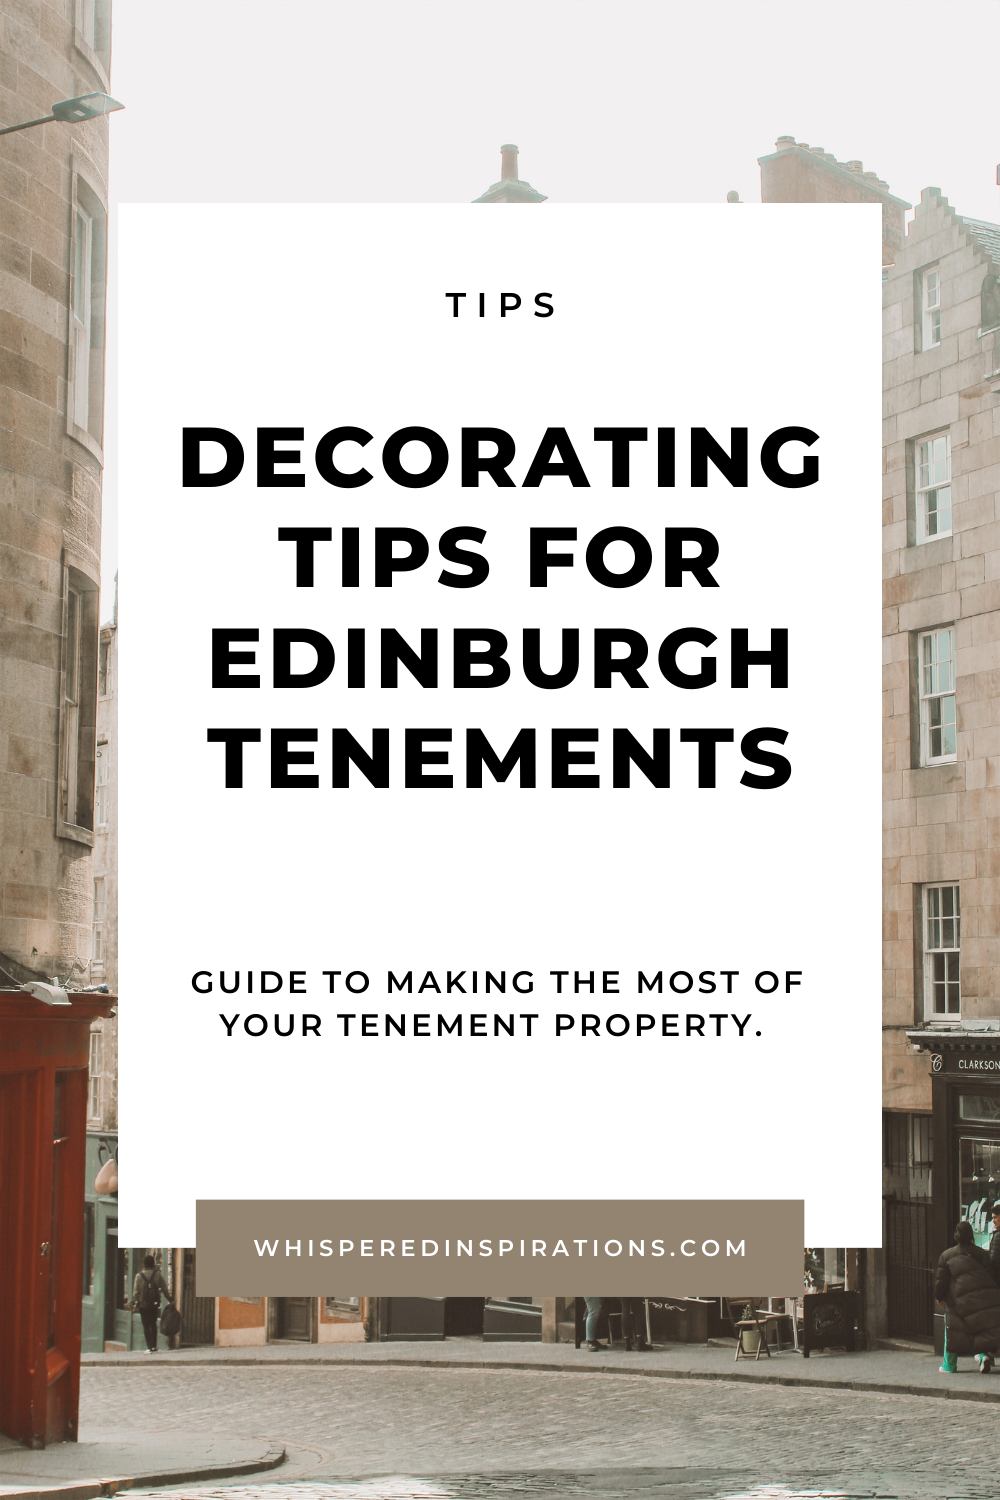 Traditional Edinburgh tenements are shown. This article covers decorating tips for Edinburgh tenements. 